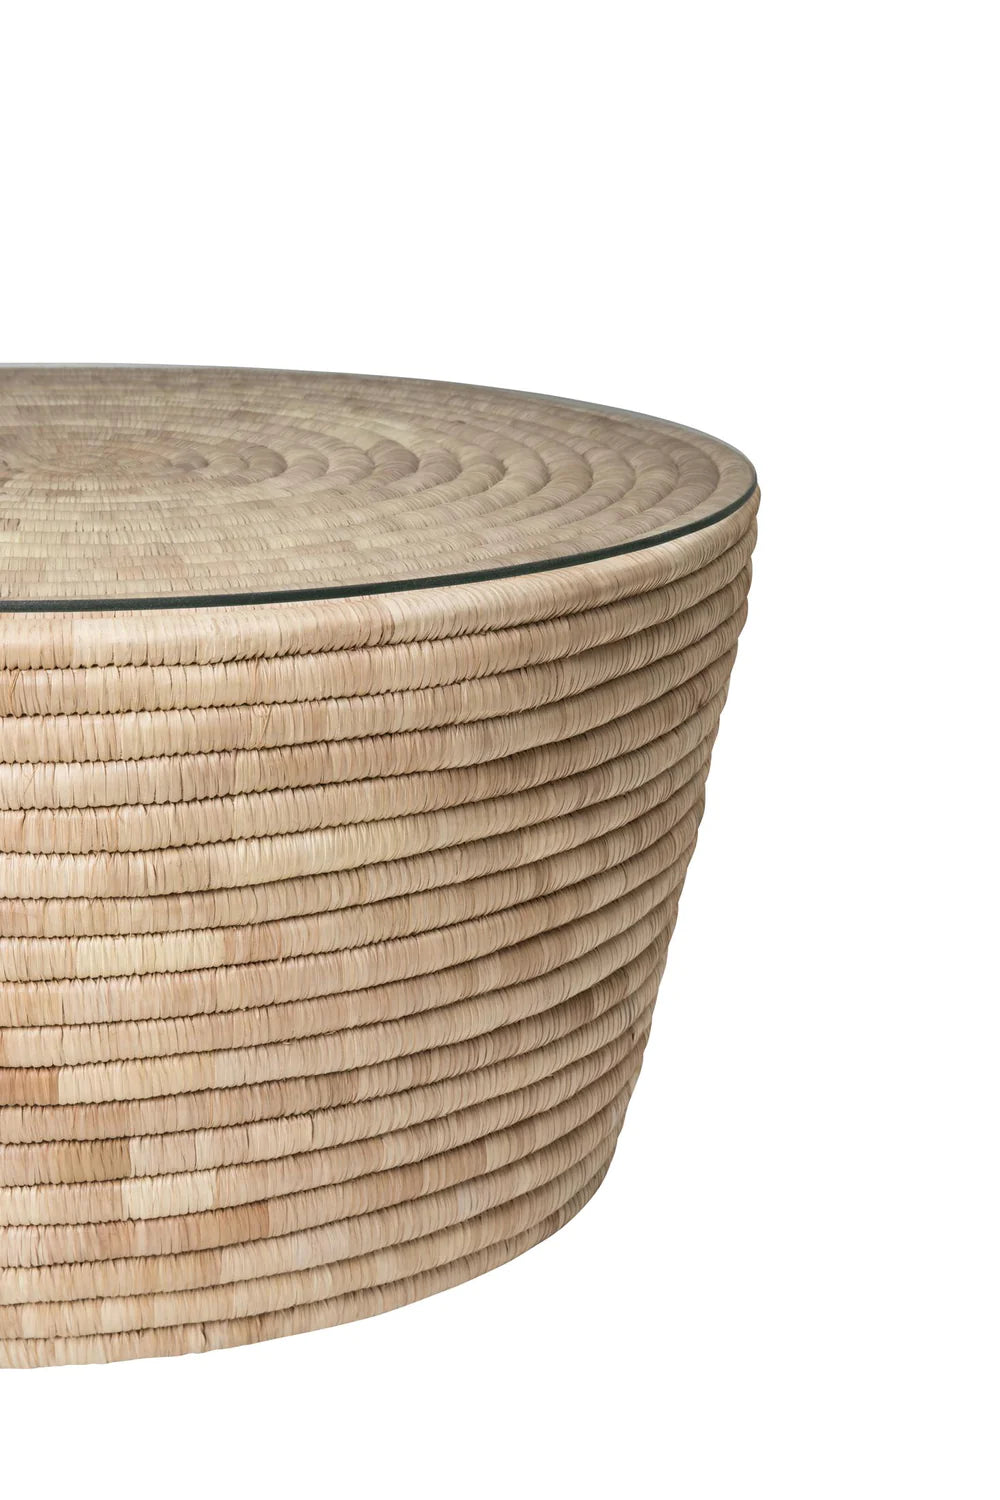 Malawian Palm Coffee Table Natural